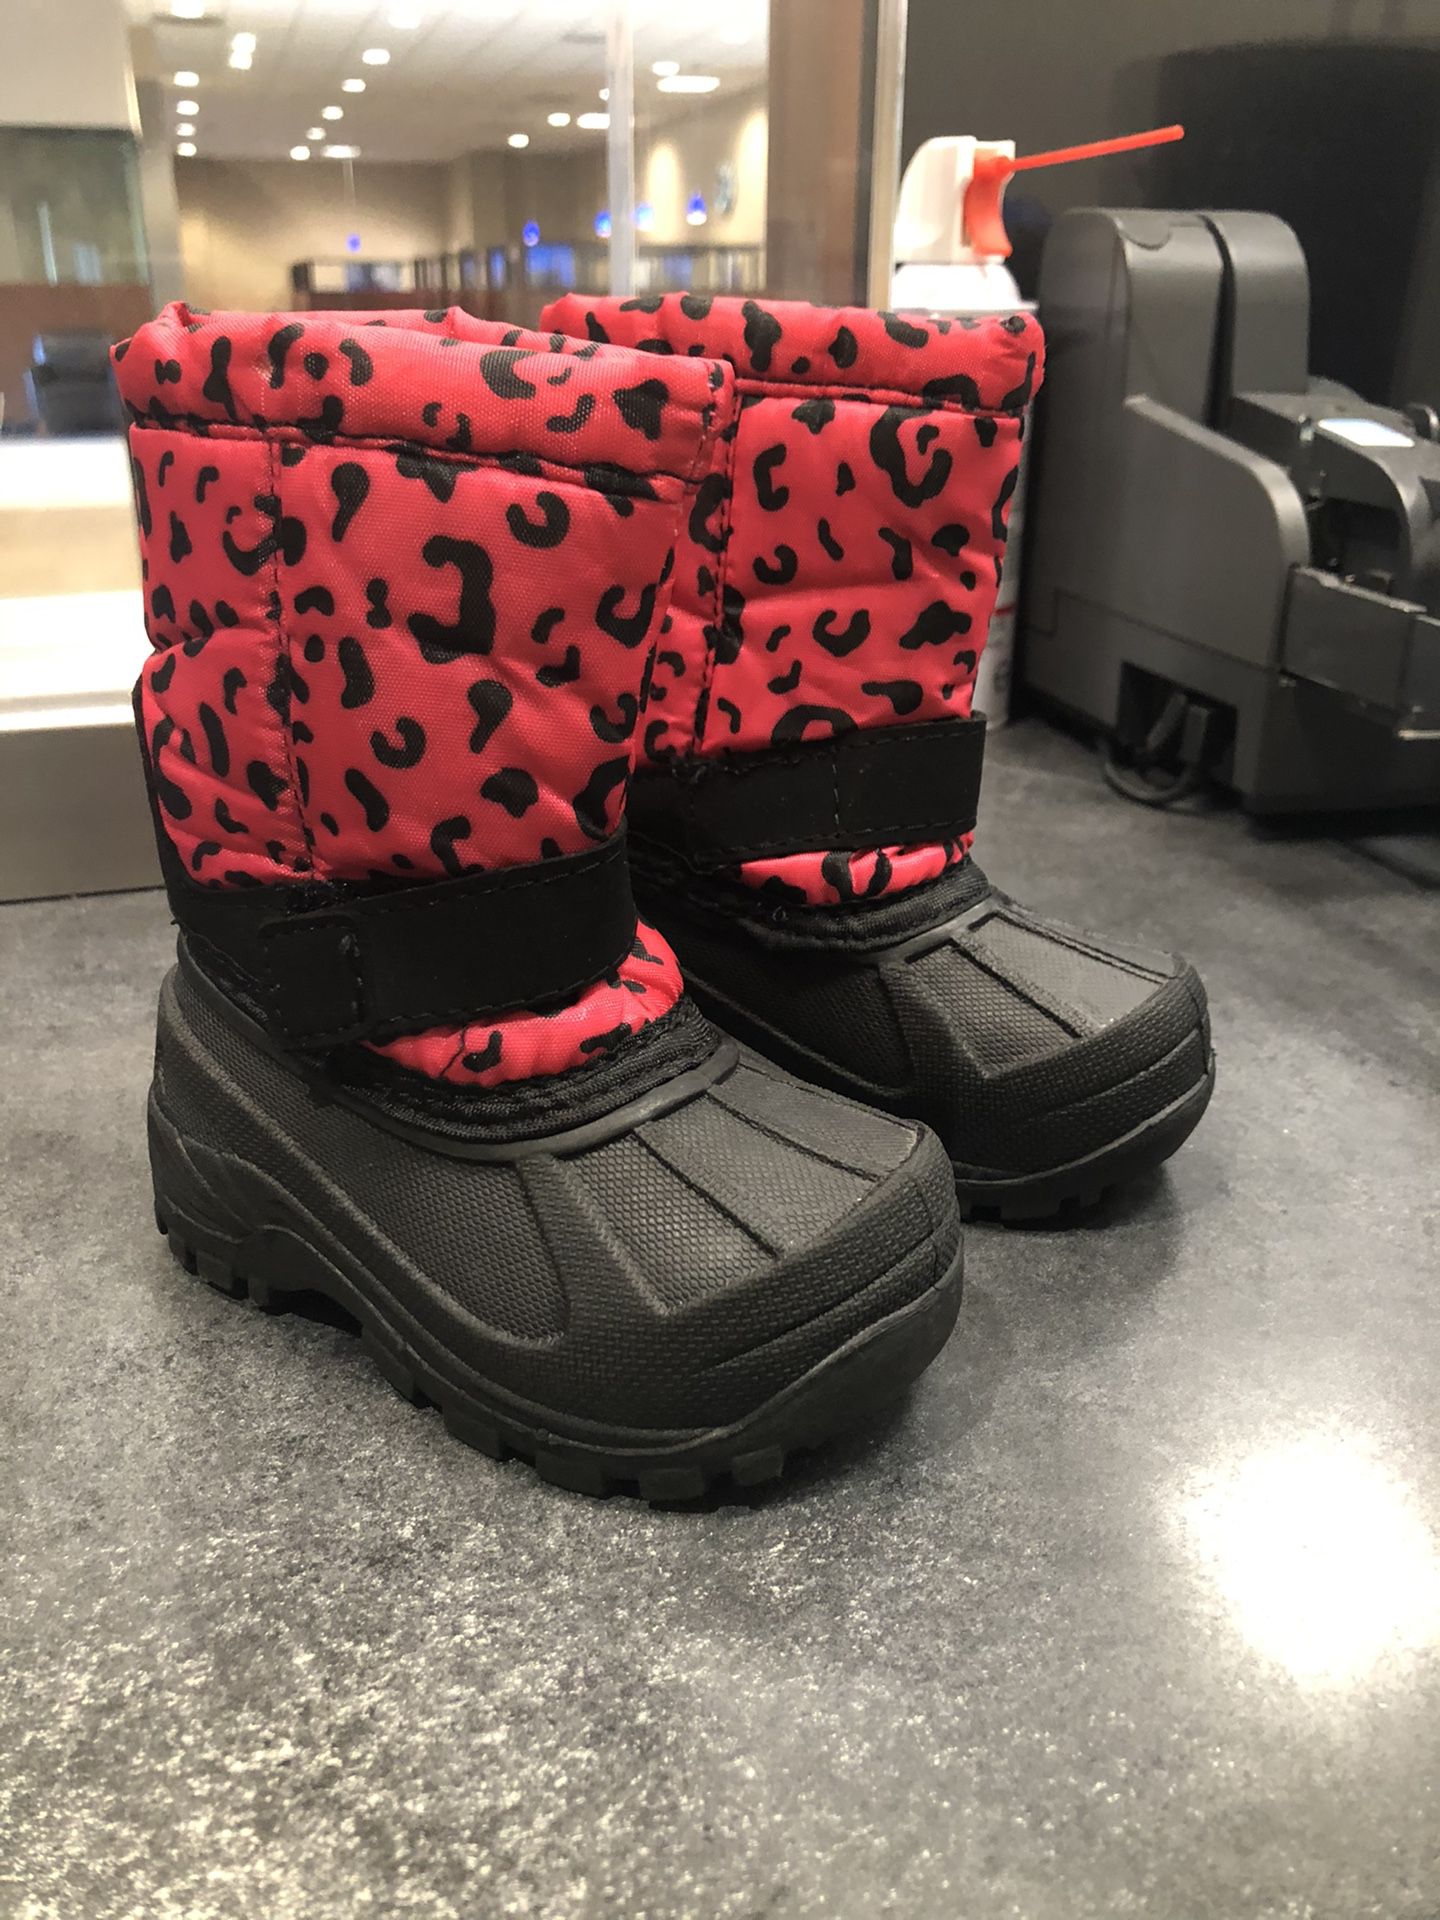 Baby Toddler Girls Snow Boots Size 5 LIKE NEW